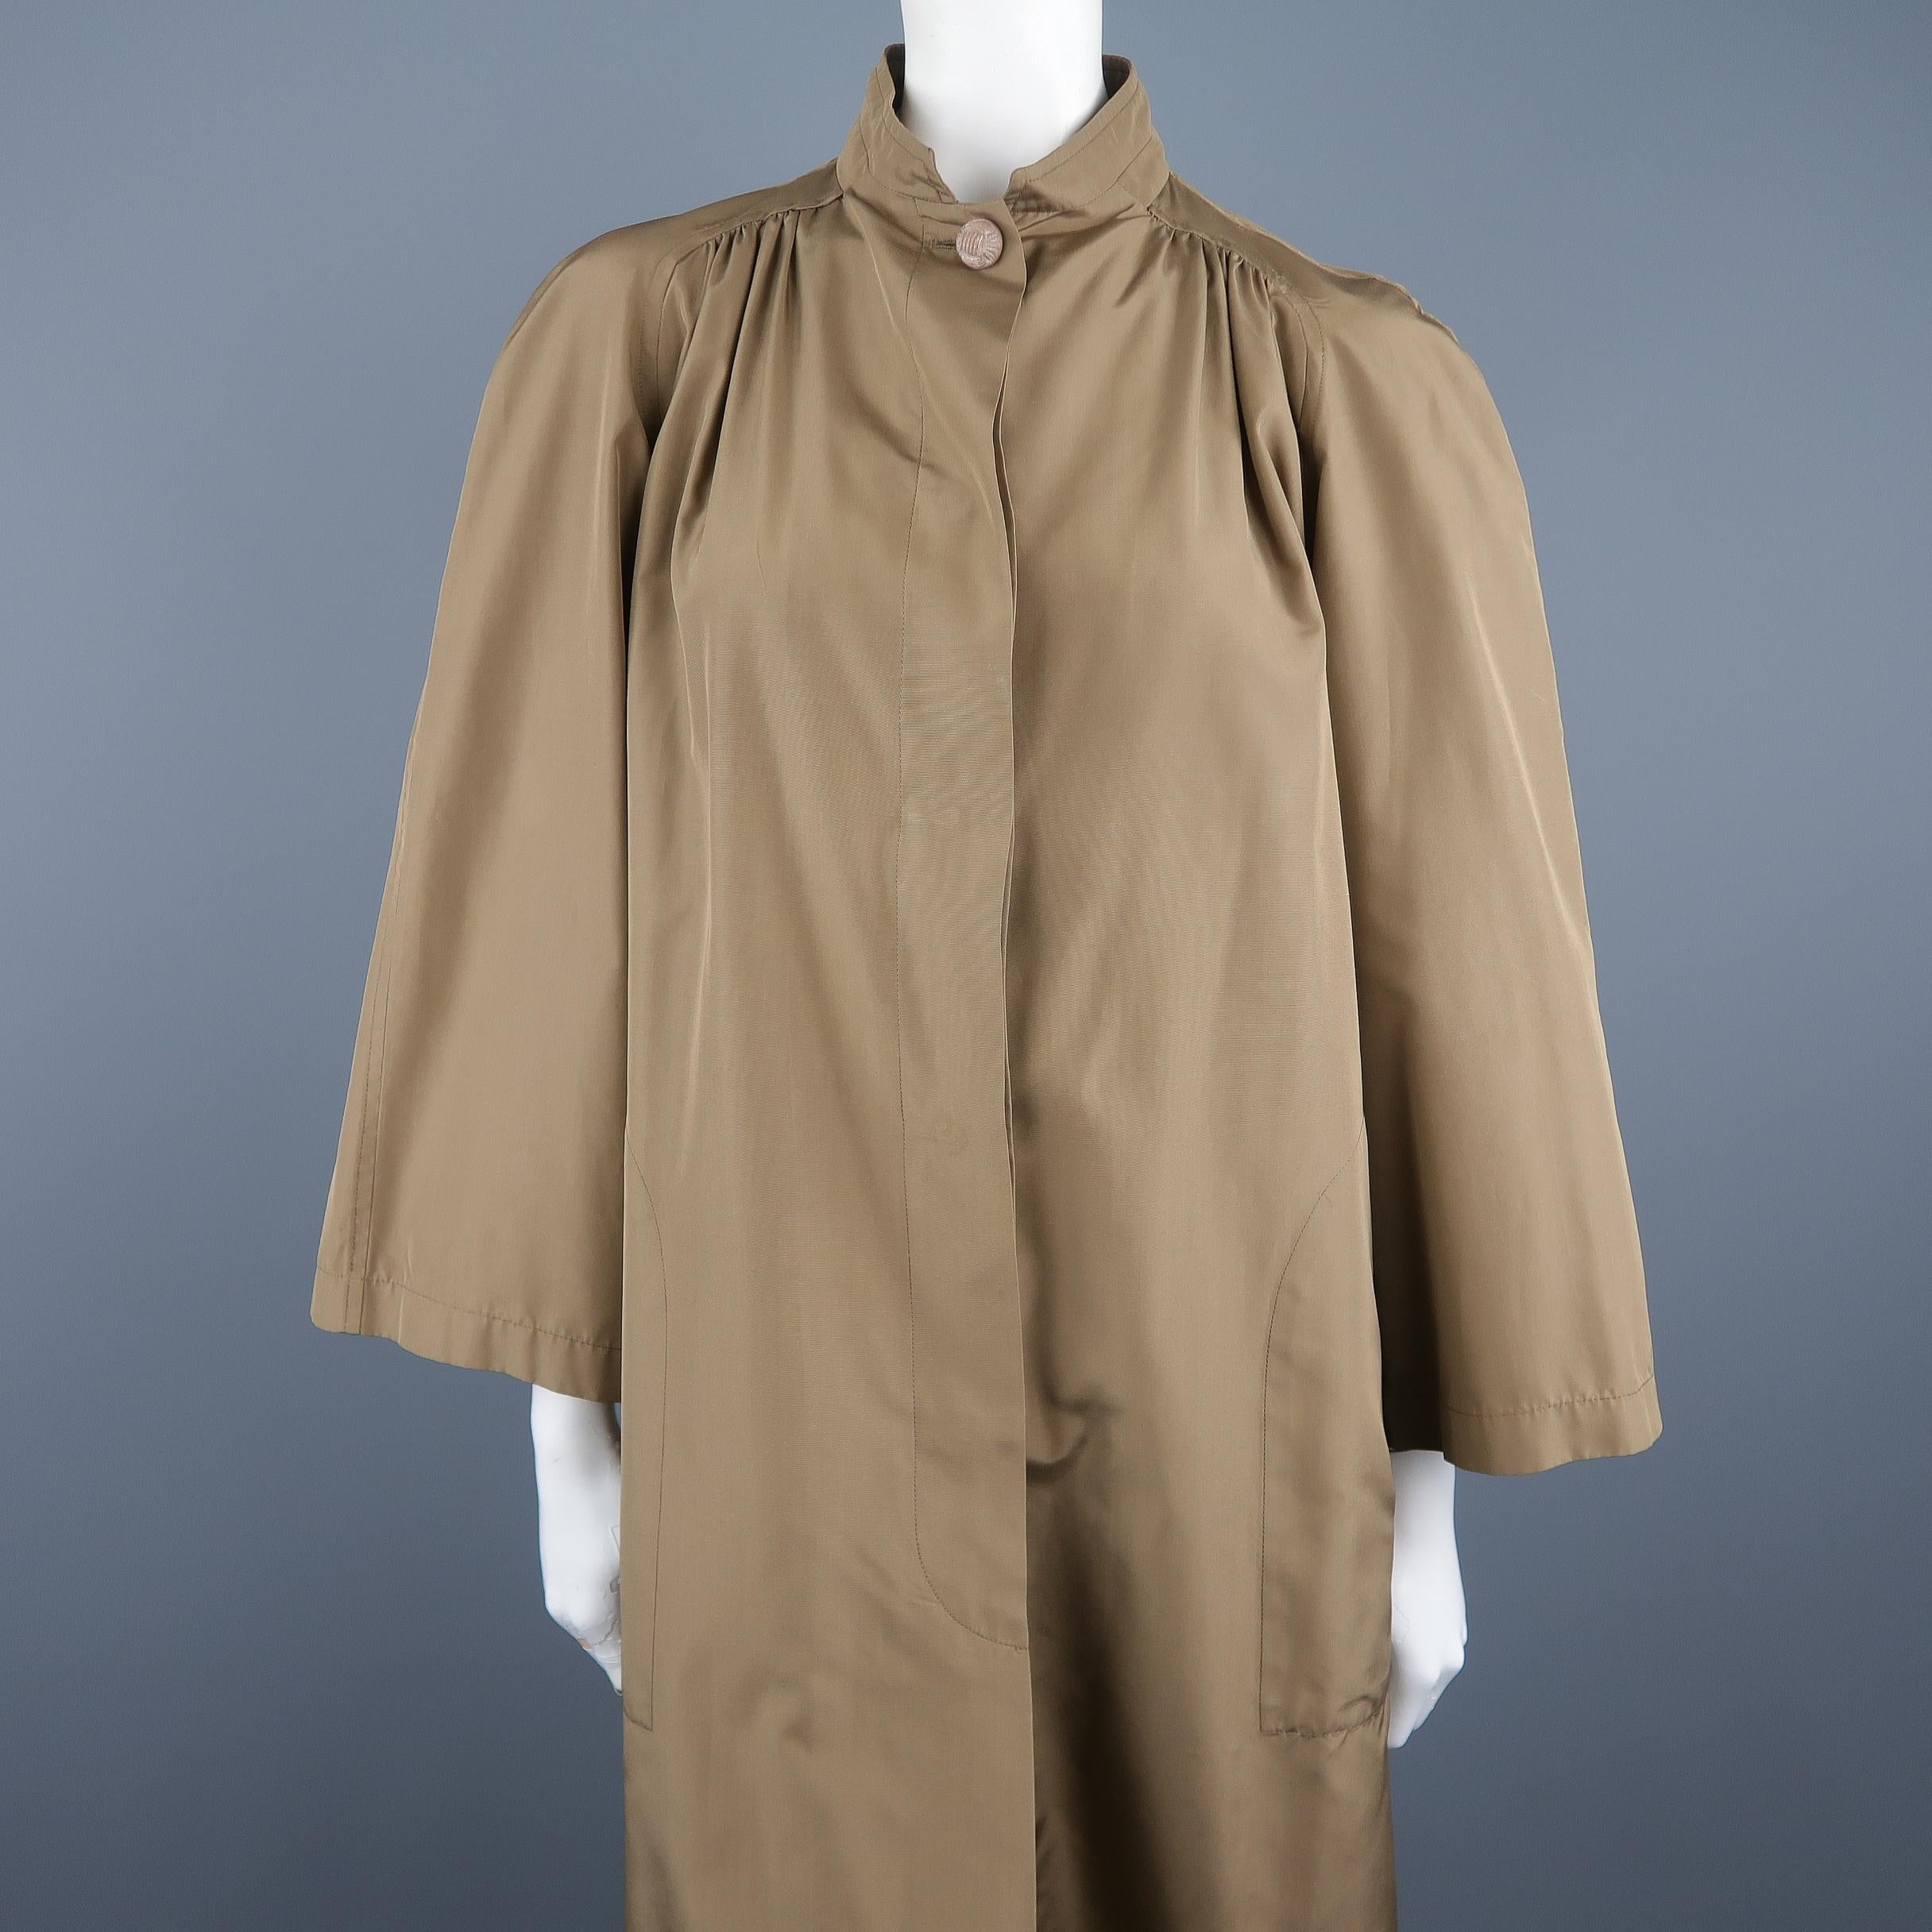 Vintage VALENTINO Boutique overcoat comes in tan taffeta with a stand up collar, wide cropped sleeve, gathered shoulders, hidden placket button up closure, and oversized A line silhouette. Made in France.
 
Excellent Pre-Owned Condition.
Marked: (no